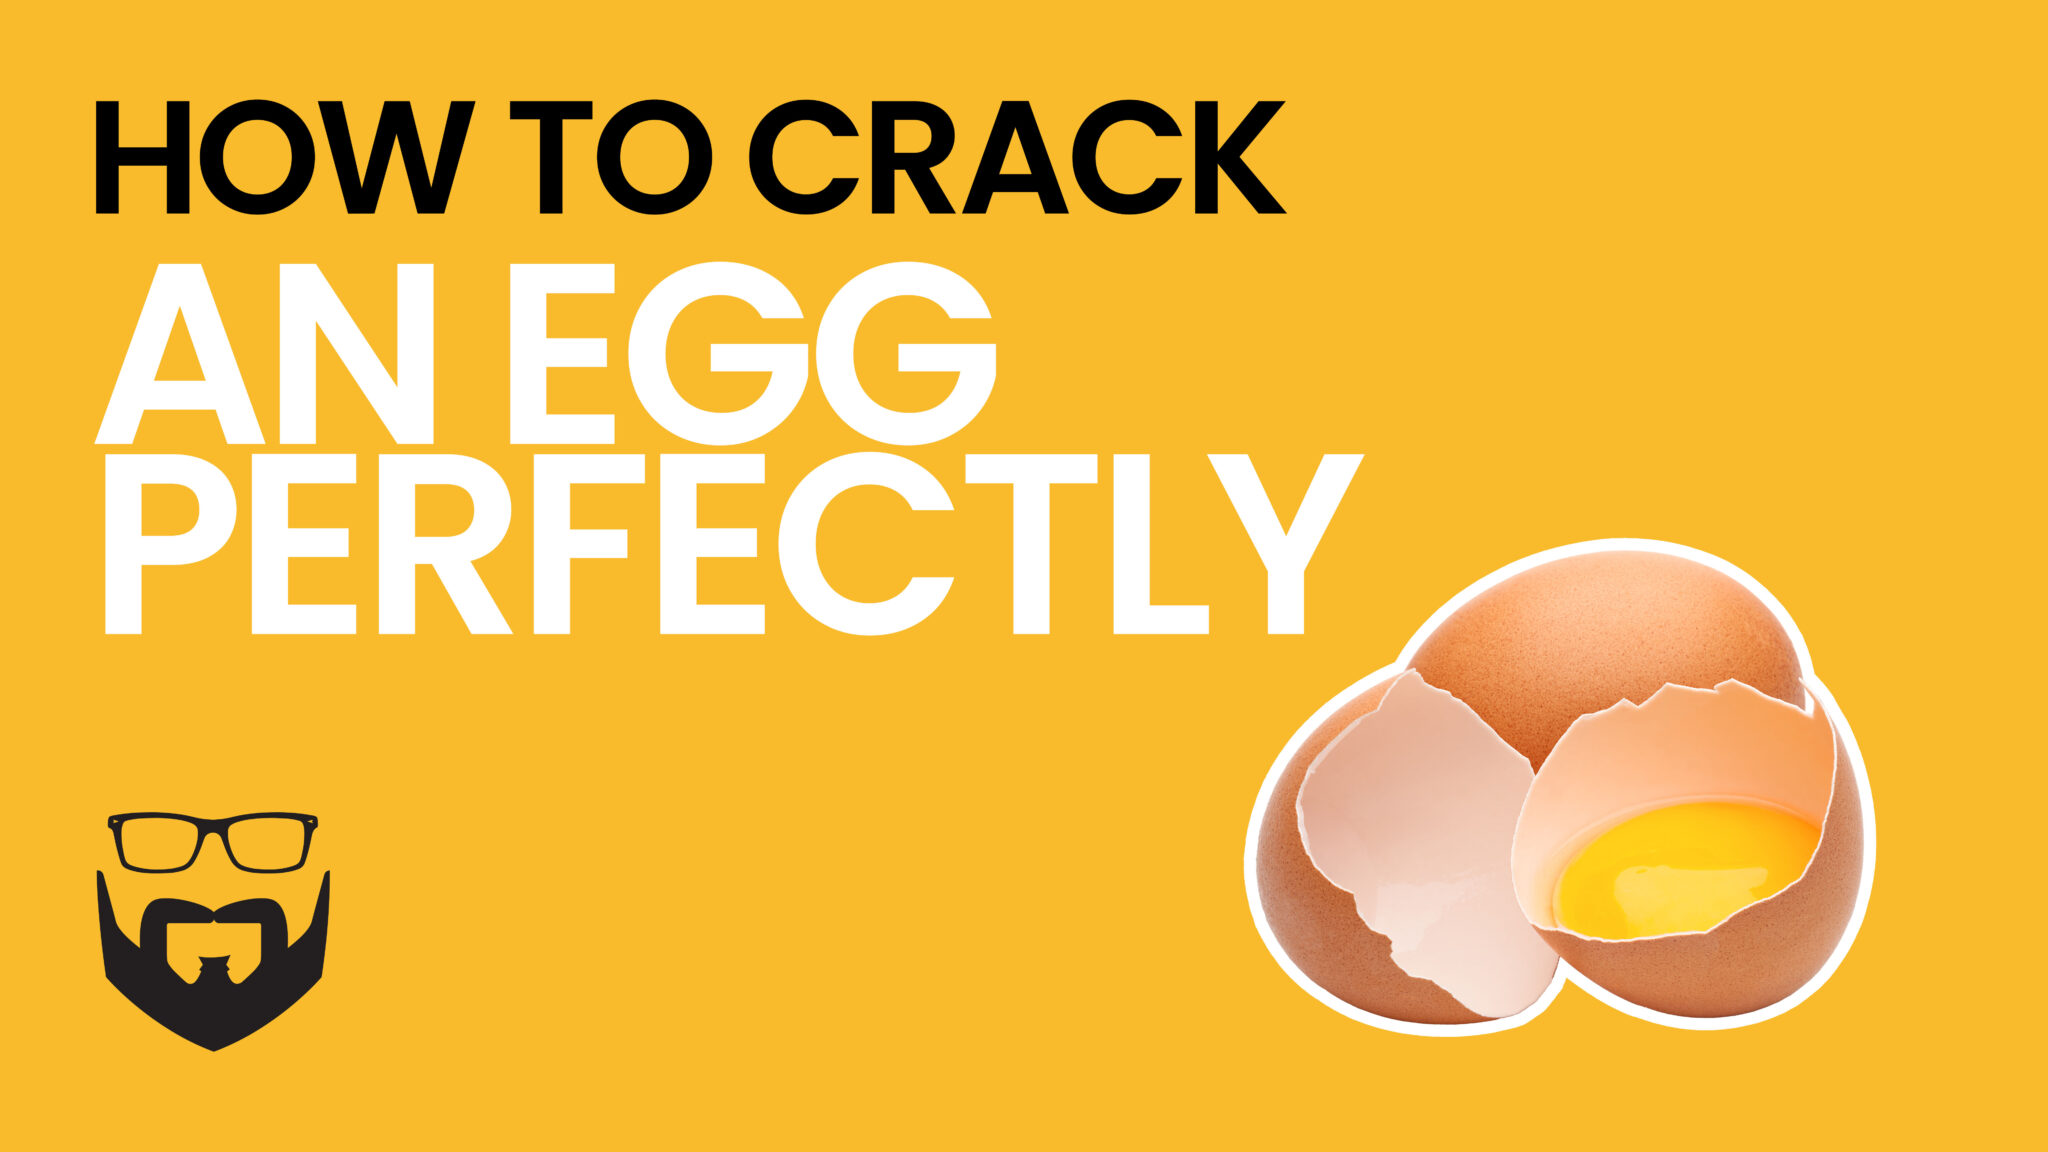 How to Crack an Egg Perfectly Video - Yellow